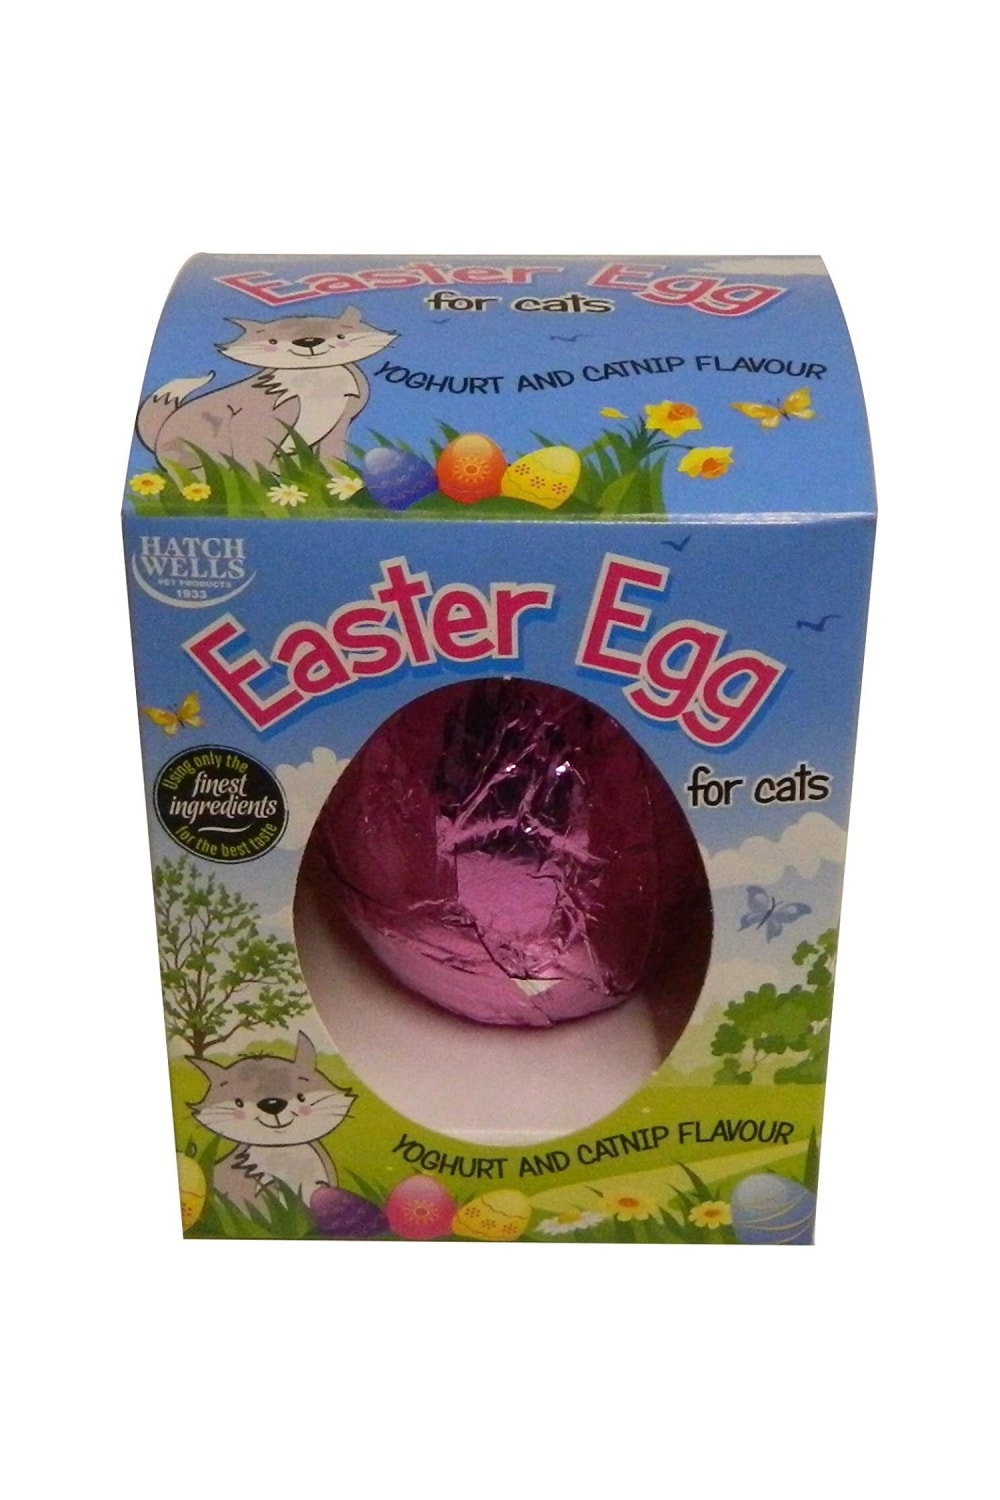 Hatchwell Easter Egg Yoghurt and Catnip Cat Treat (Multicolored) (40g)